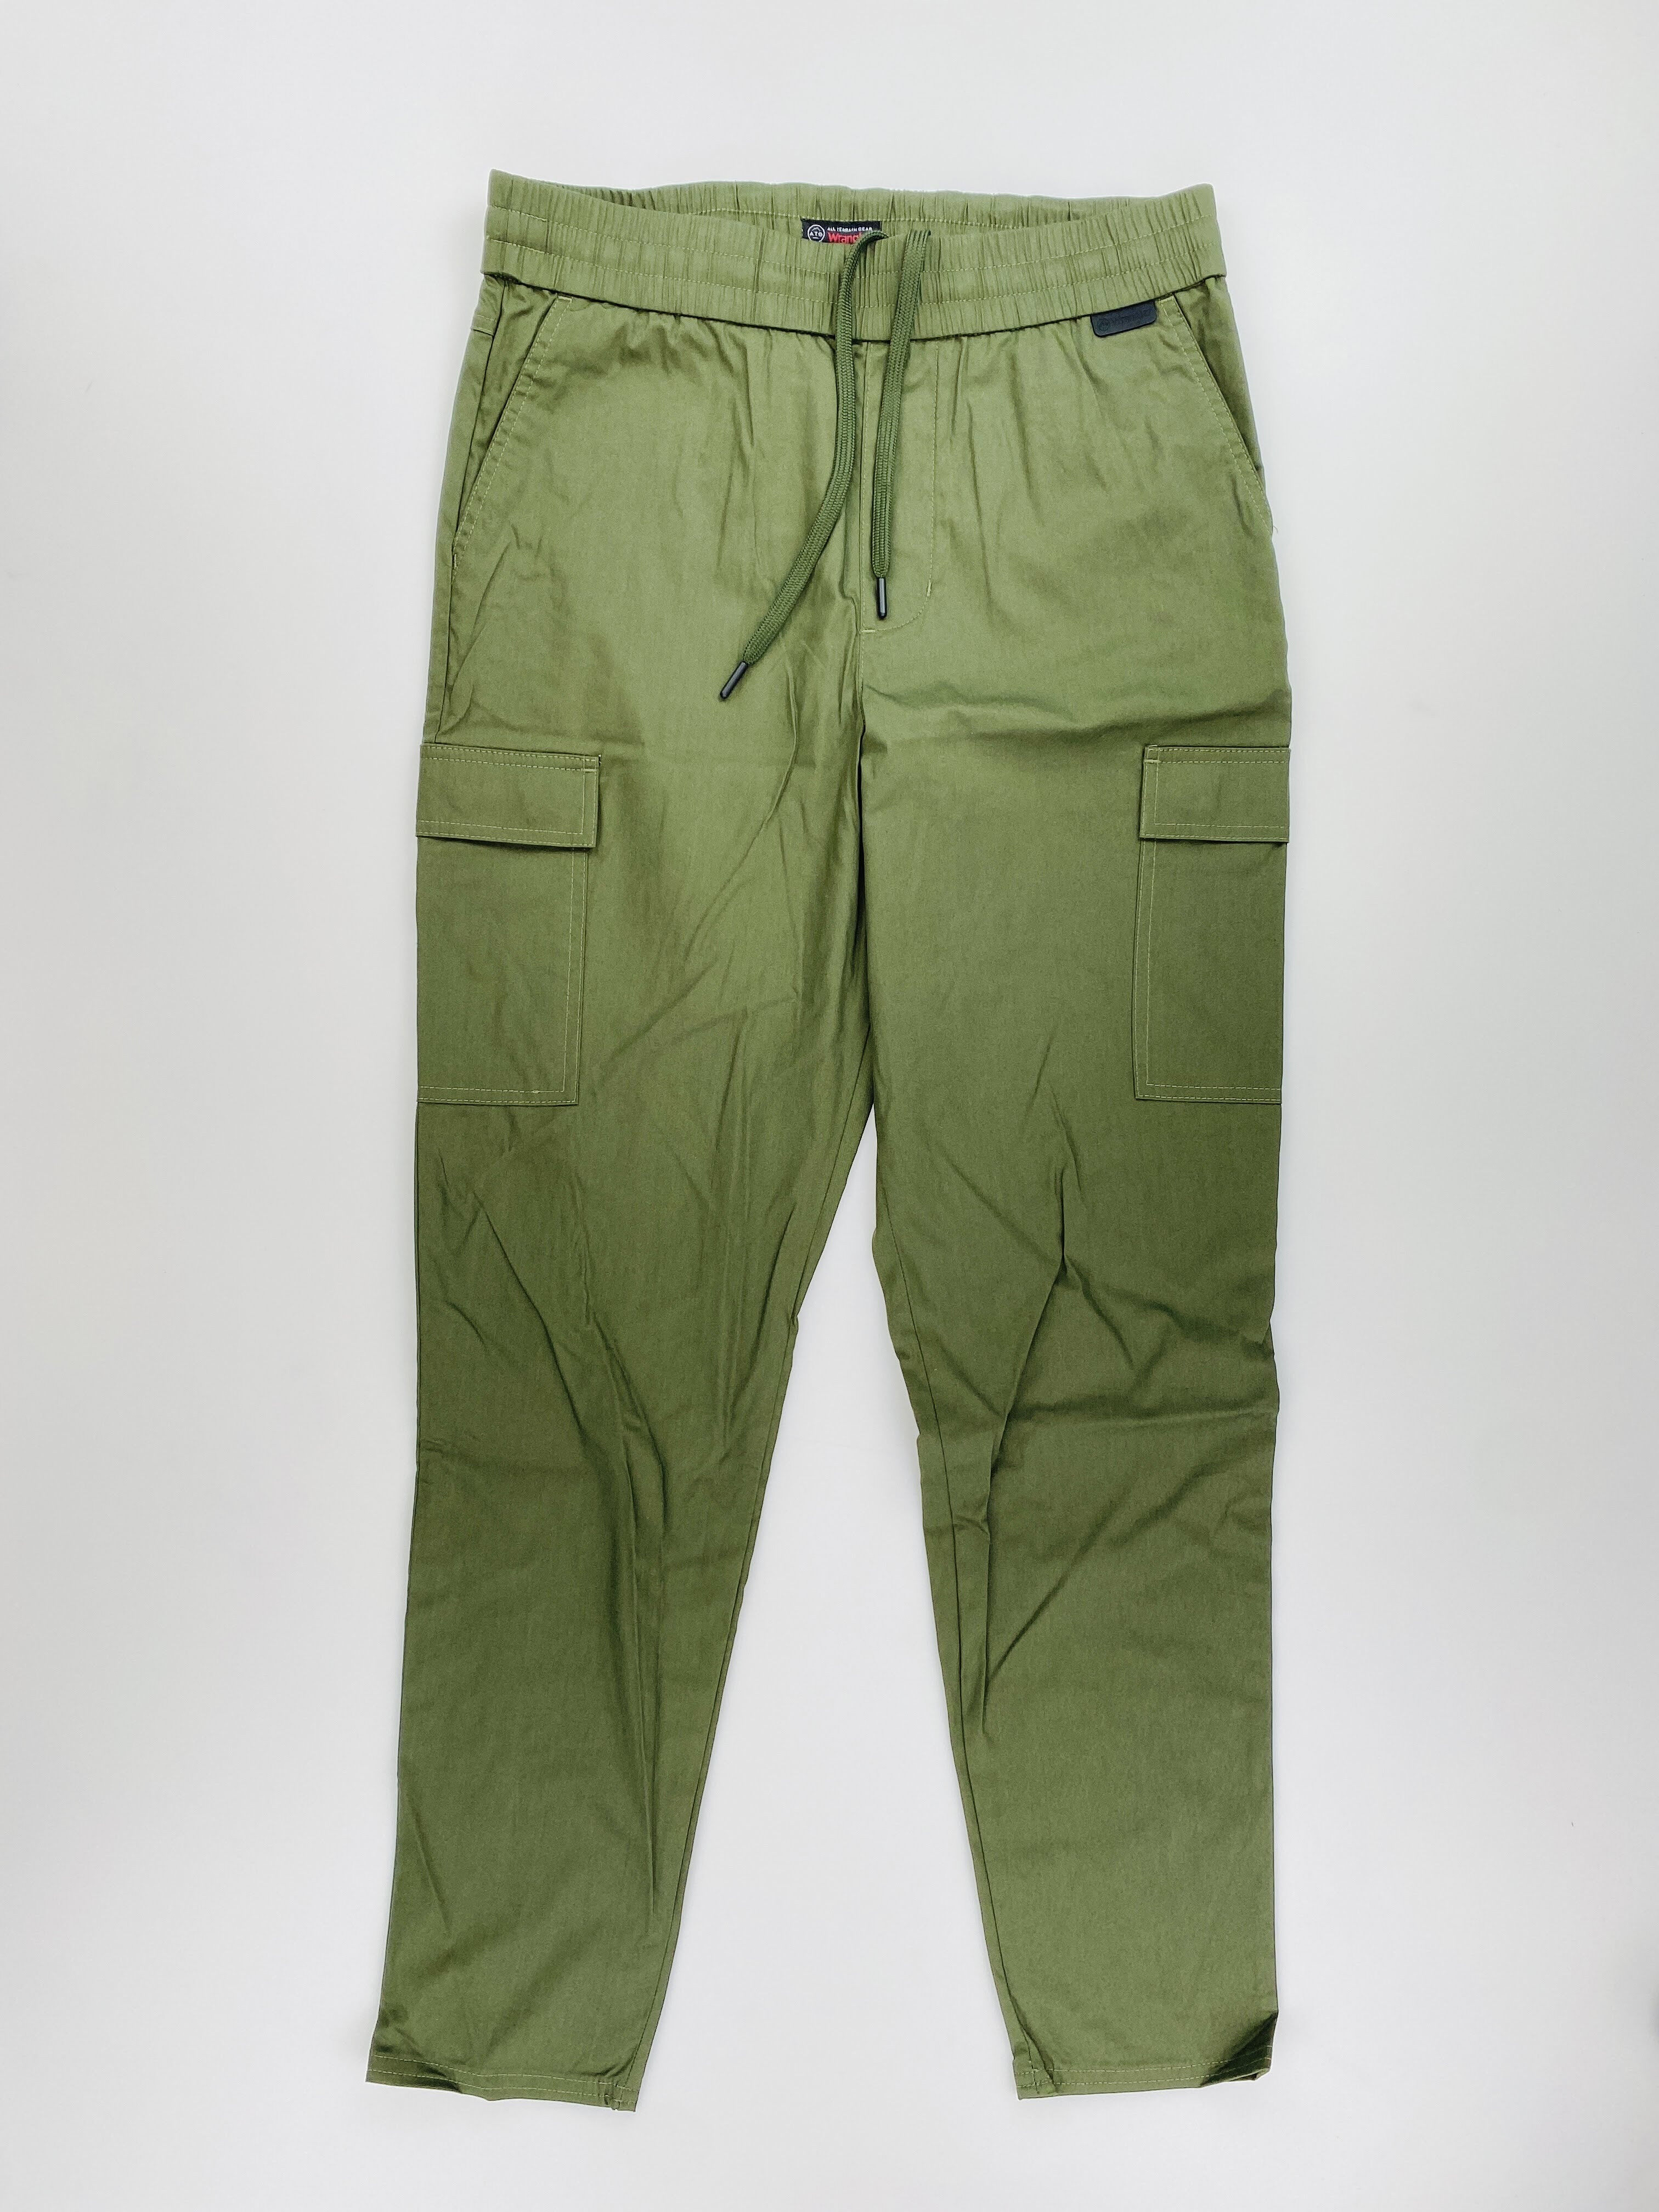 Wrangler Cargo Jogger - Second Hand Walking trousers - Women's - Olive  green - US 28